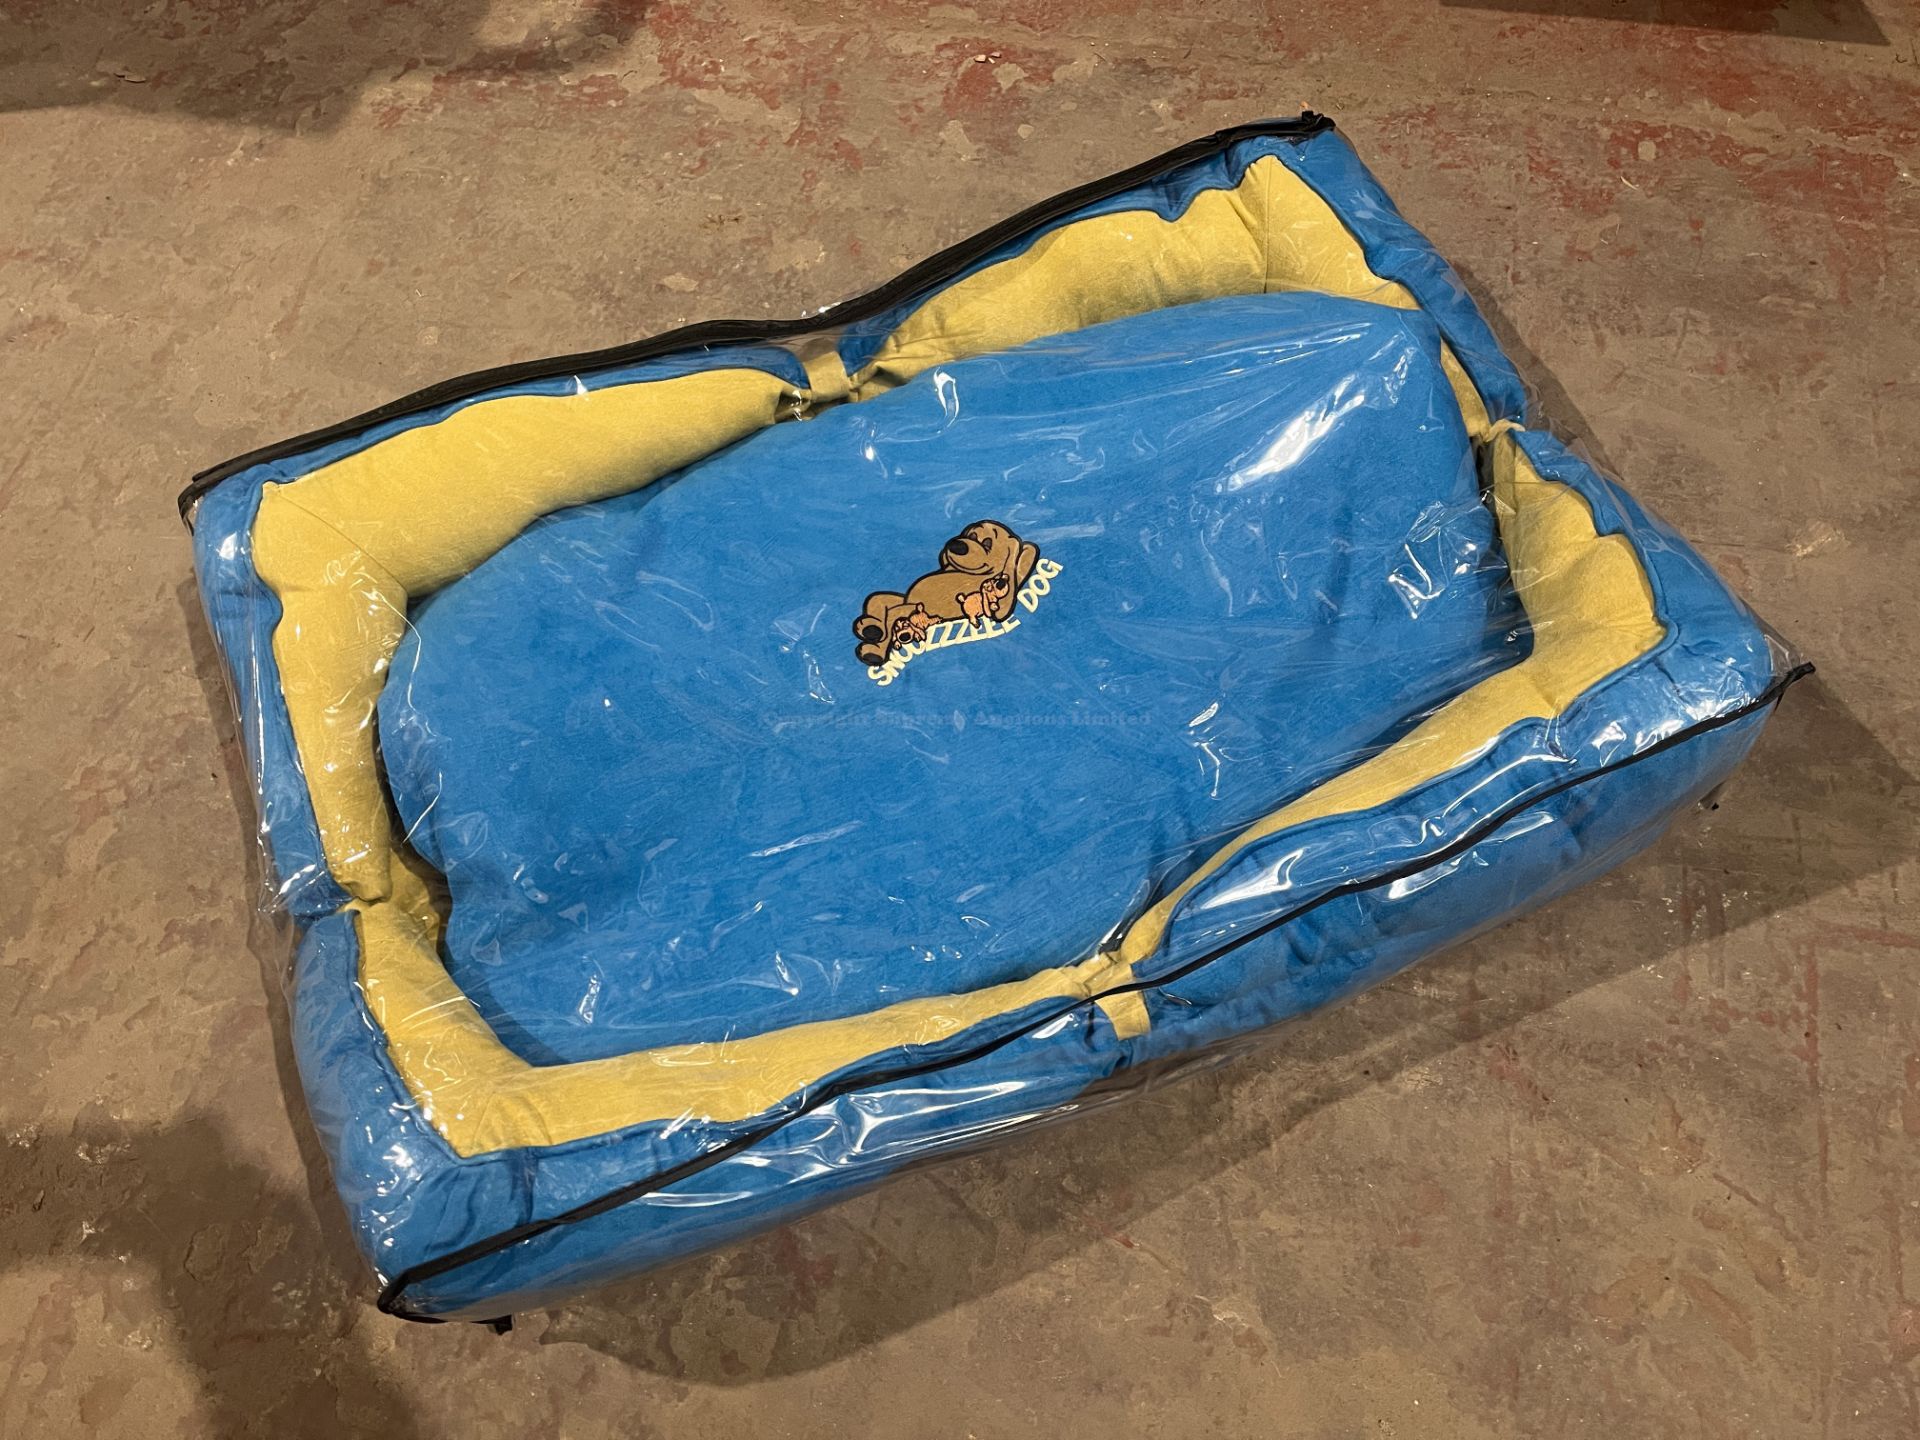 5 X BRAND NEW SNOOOZZZEEE LUXURY BLUE BOW BEDS 36 INCH R5-8